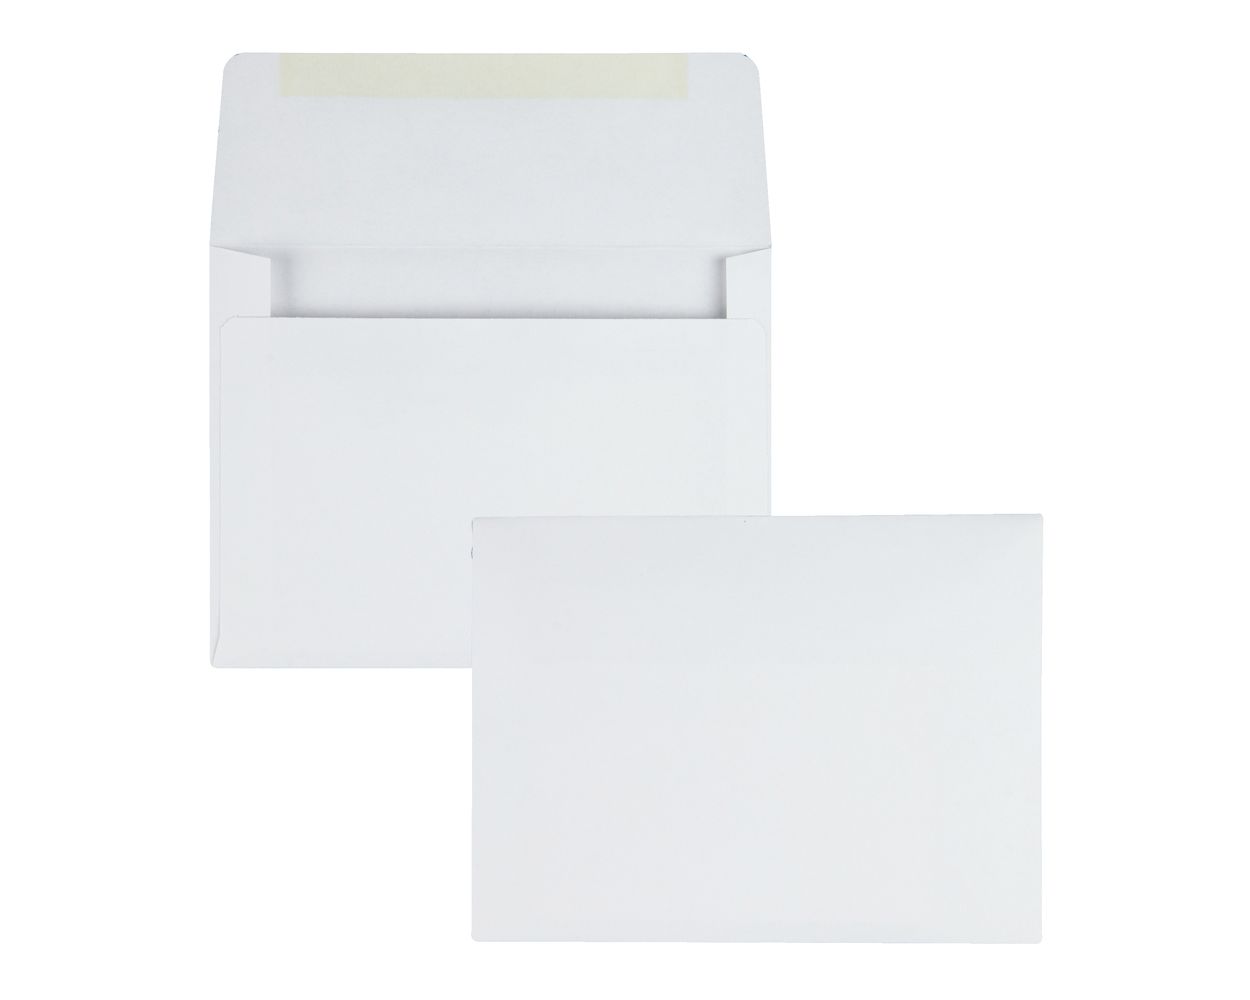 A2 Invitation Envelopes with Gummed Closure, 4-3/8 x 5-3/4, 24 lb. White  Wove, Quarter Fold Sized Envelopes Ideal for Invitations, Photos, Wedding  Announcements, RSVPs and Greeting Cards, 500 per Box